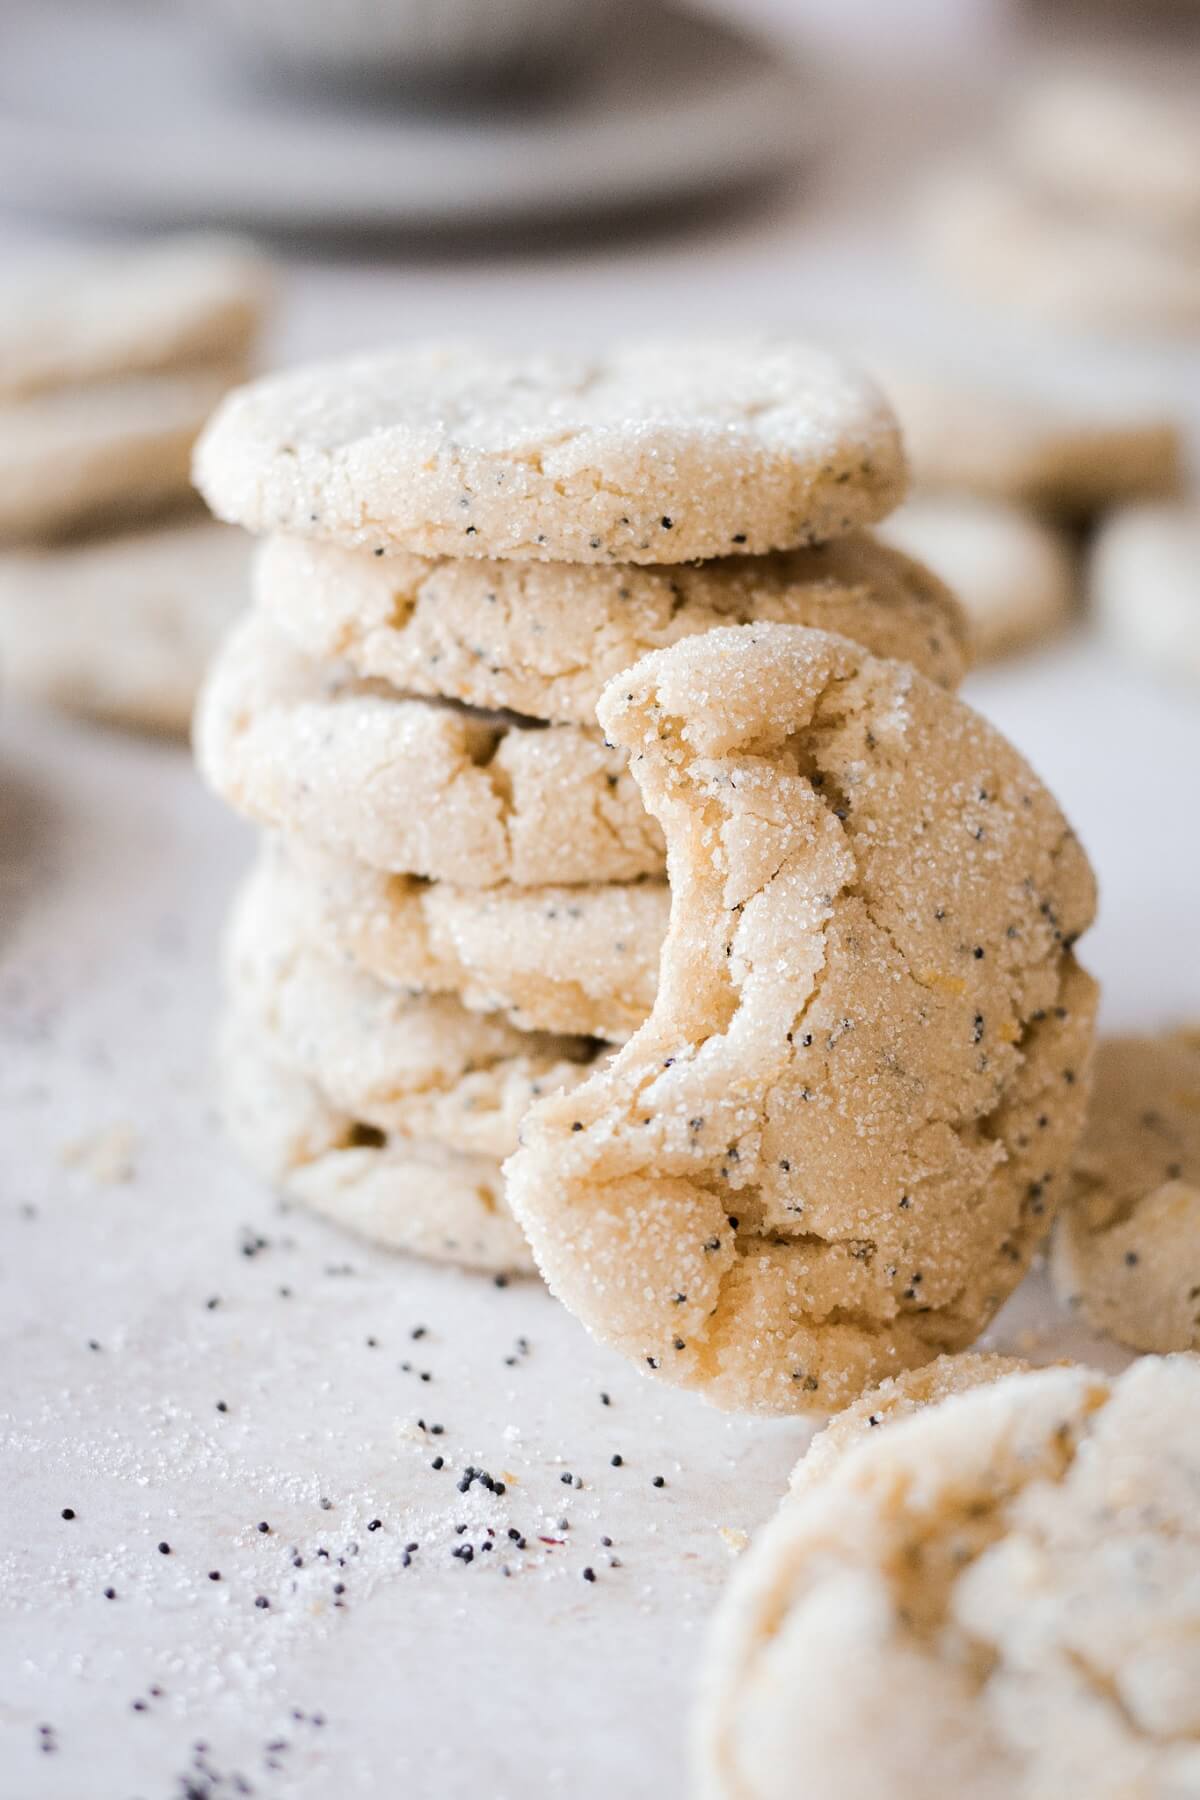 Stack of lemon poppy seed cookies, next to a cookie with a bite taken.